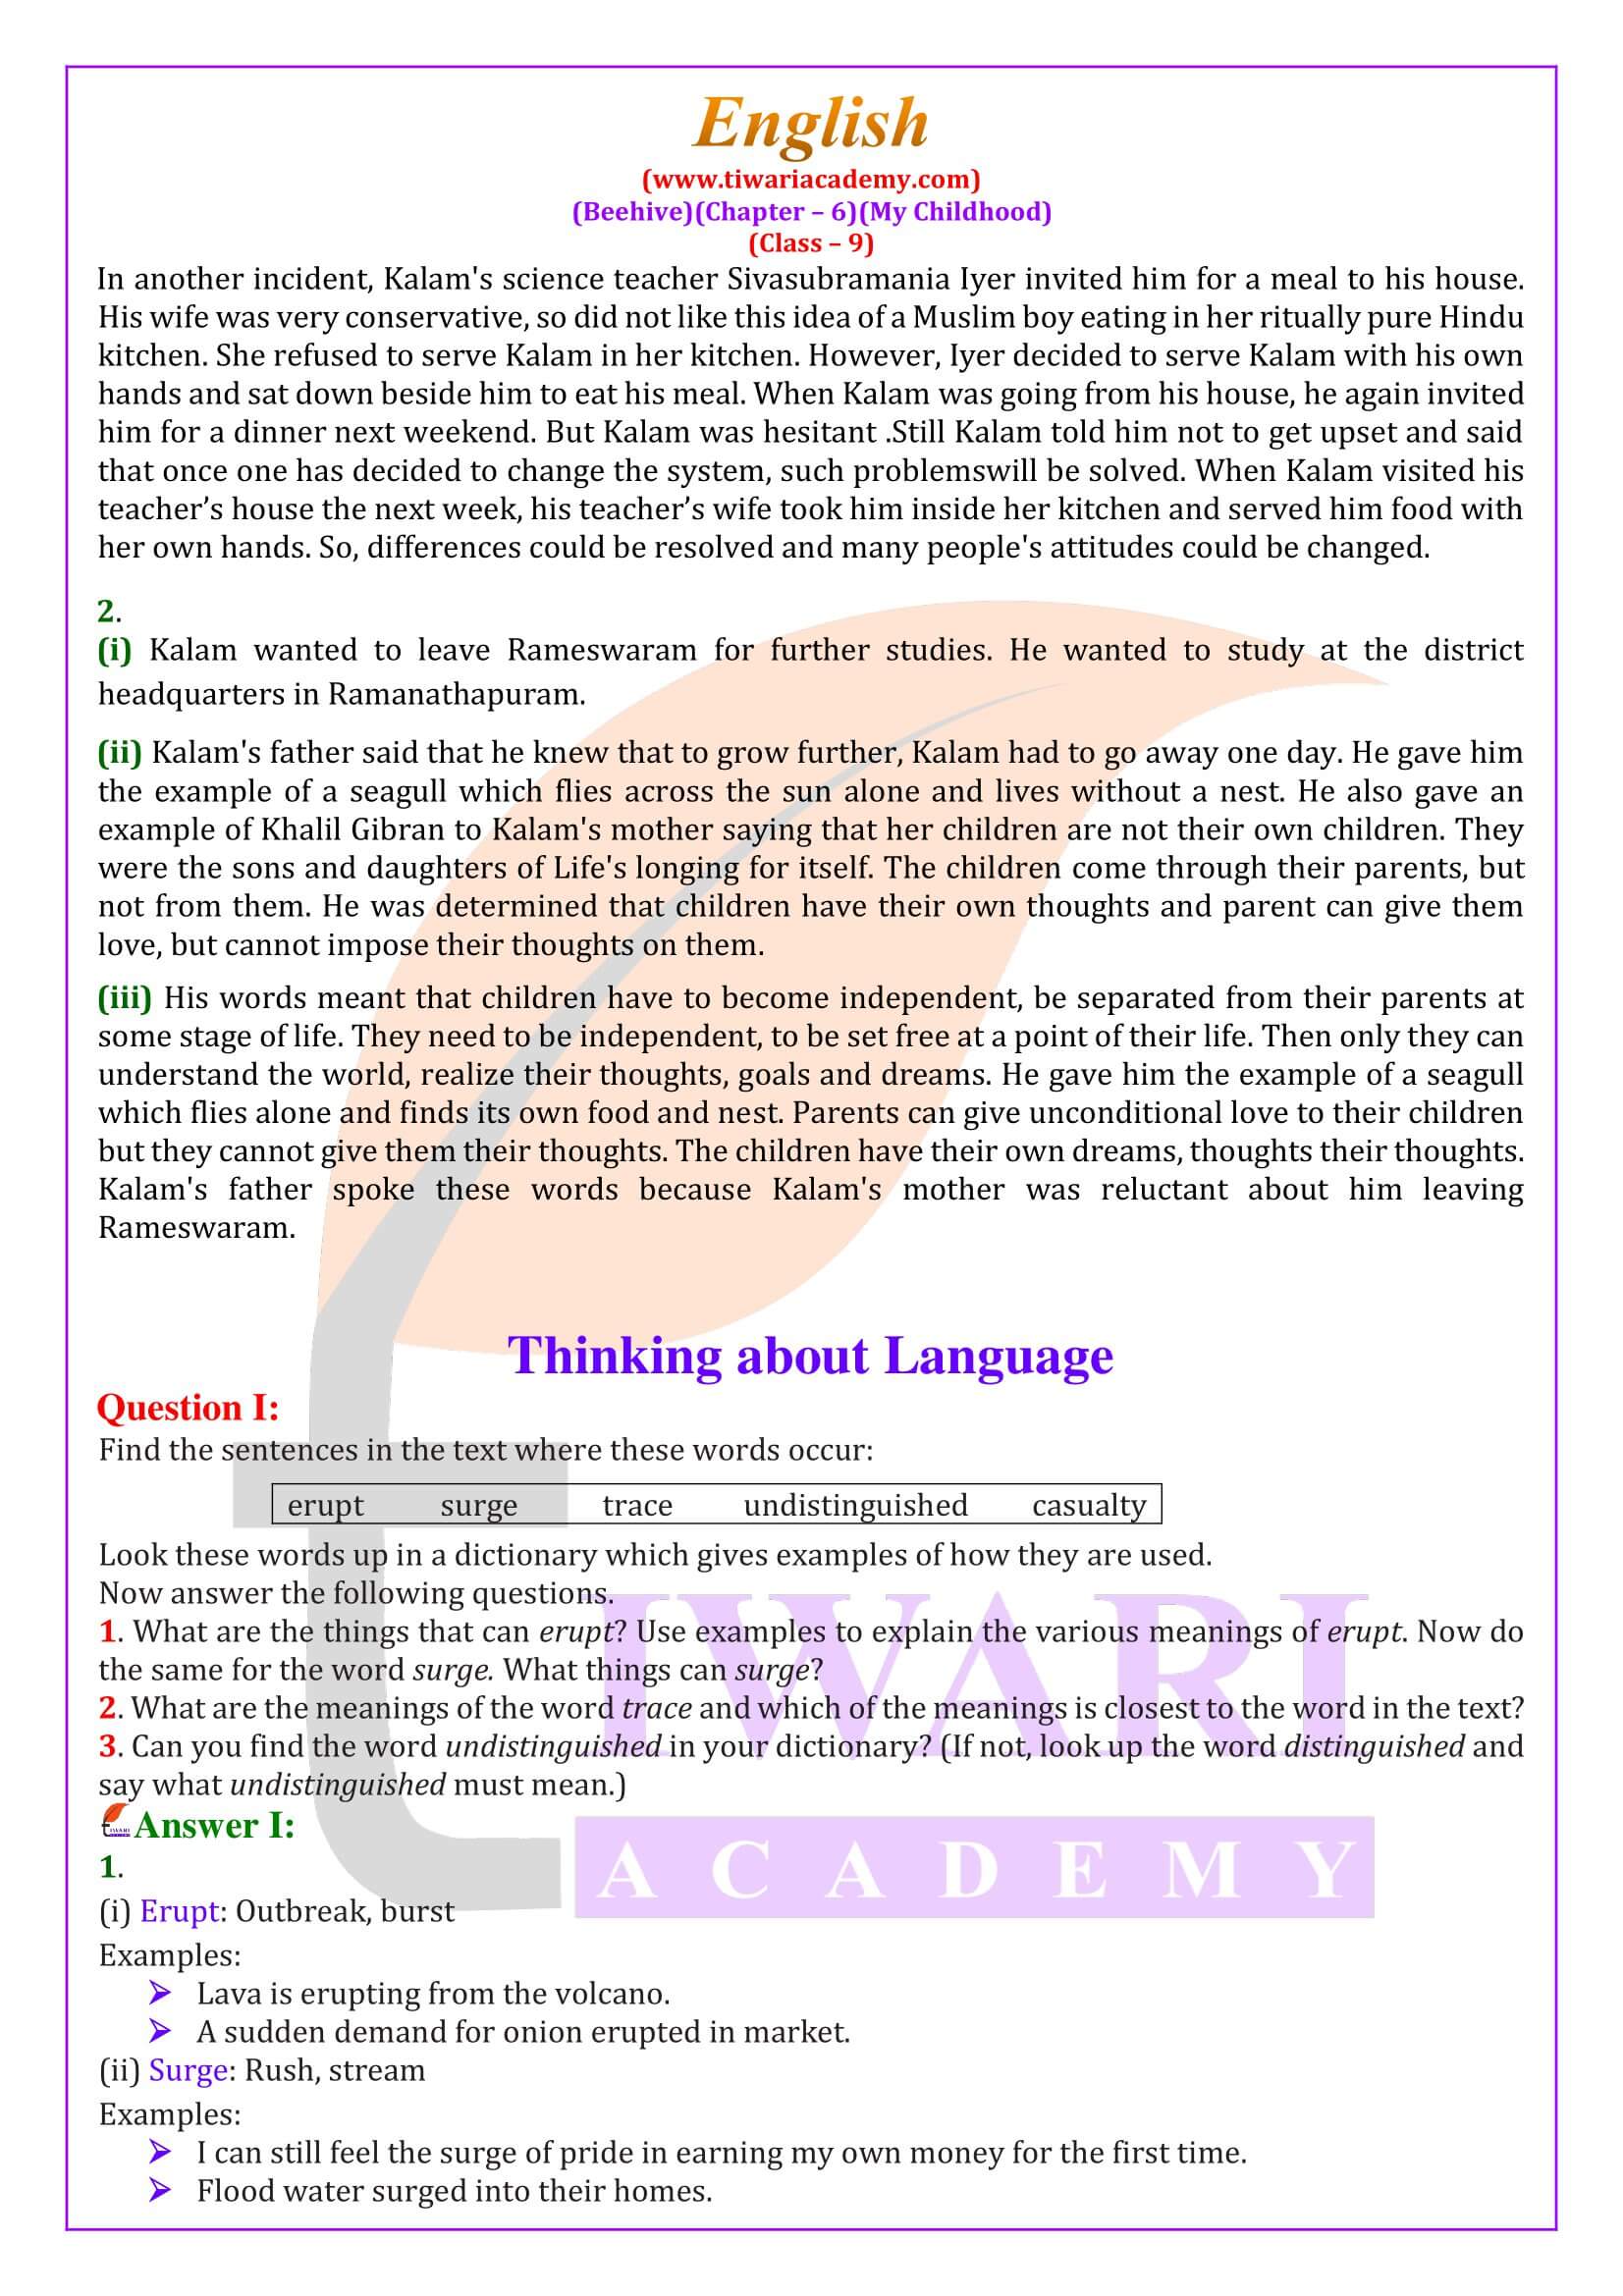 Class 9 English Beehive Chapter 6